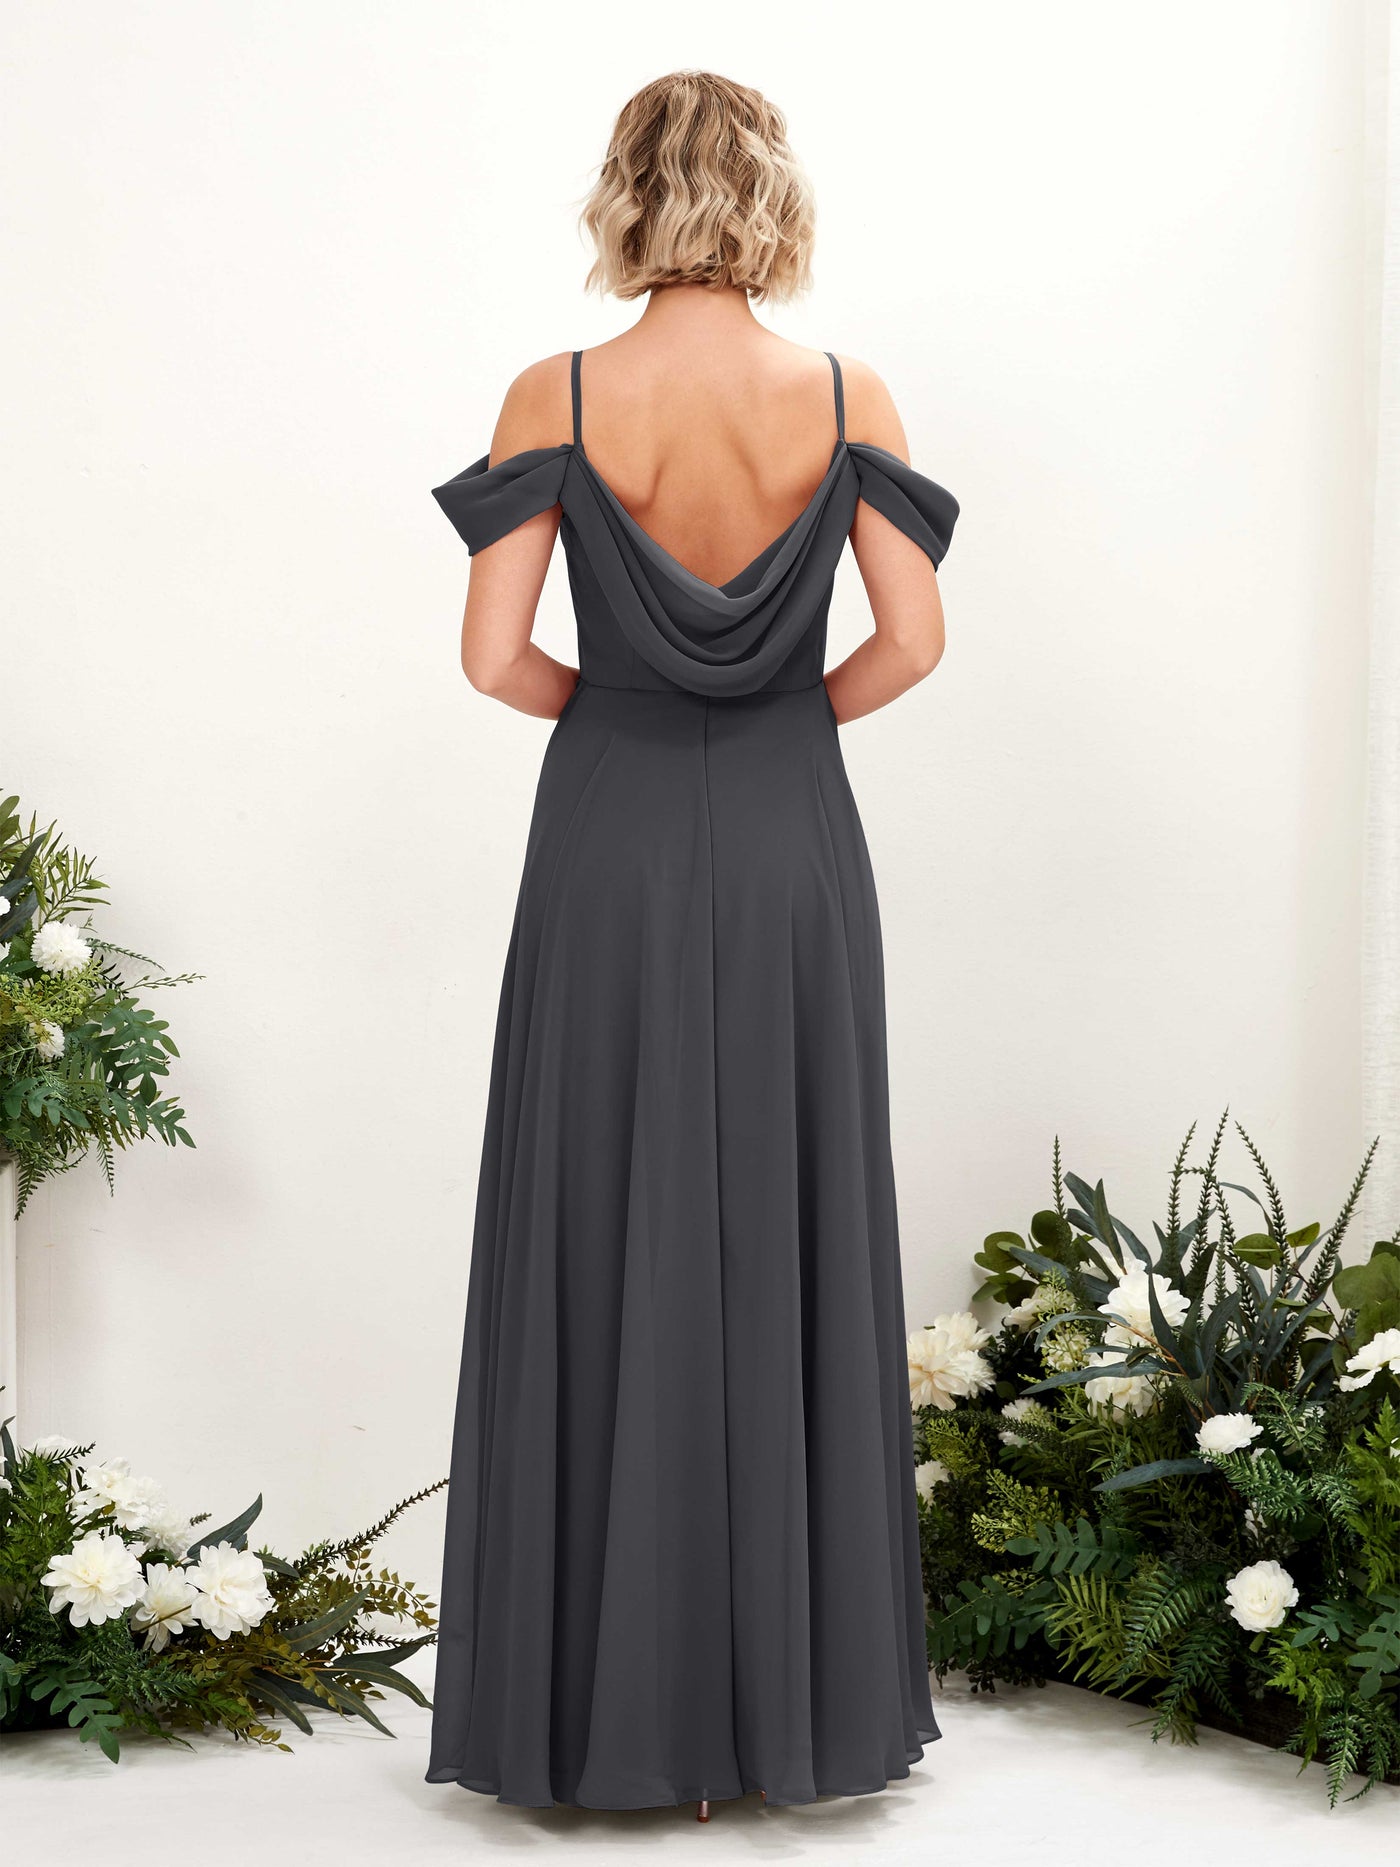 Pewter Bridesmaid Dresses Bridesmaid Dress A-line Chiffon Off Shoulder Full Length Sleeveless Wedding Party Dress (81224938)#color_pewter